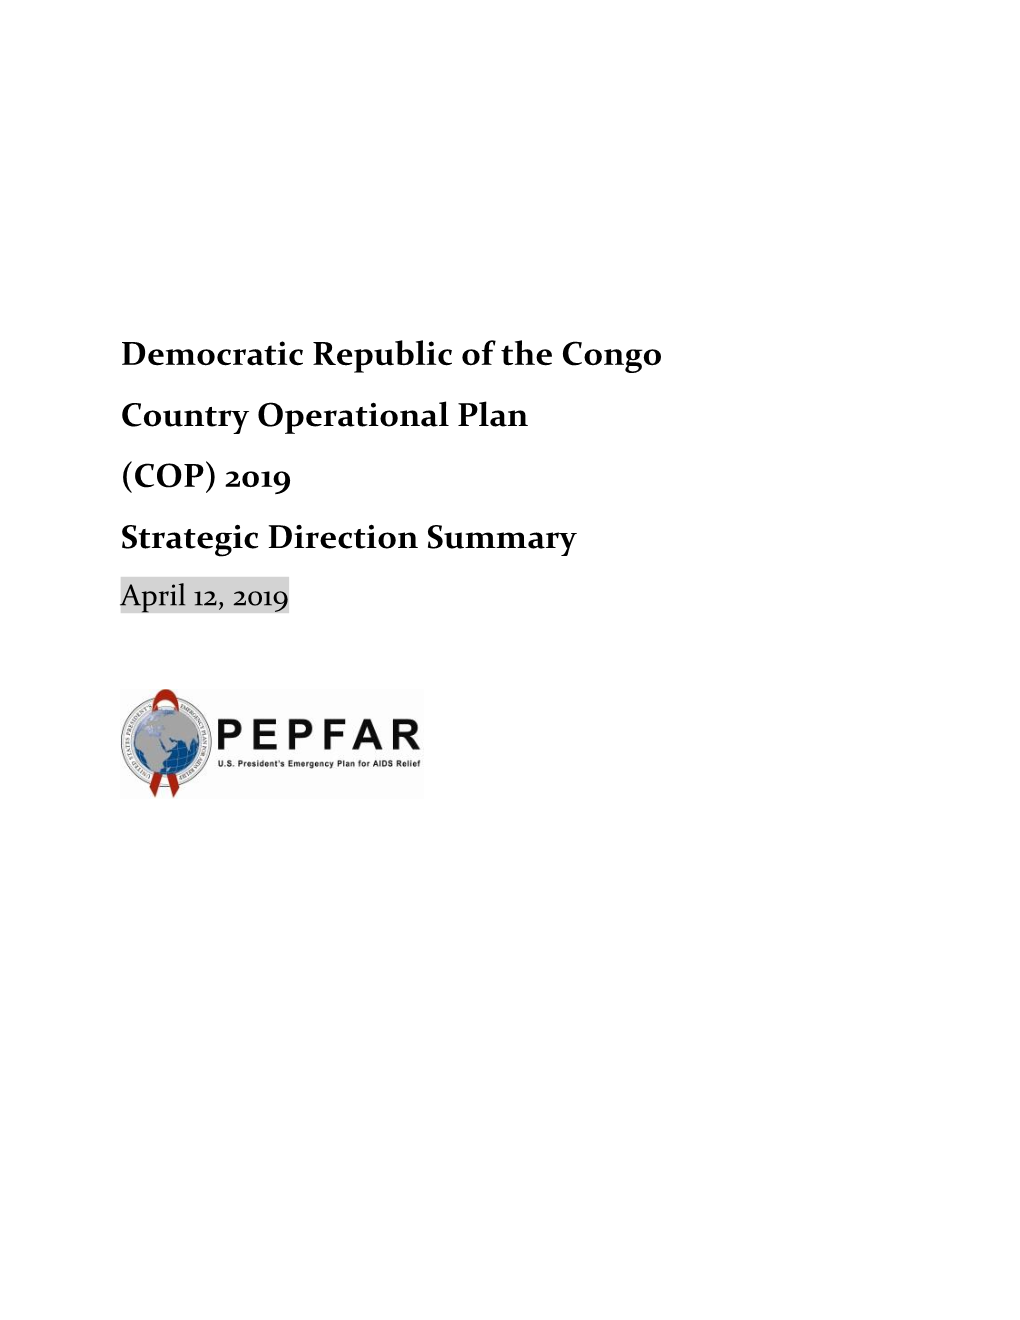 Democratic Republic of the Congo Country Operational Plan (COP) 2019 Strategic Direction Summary April 12, 2019